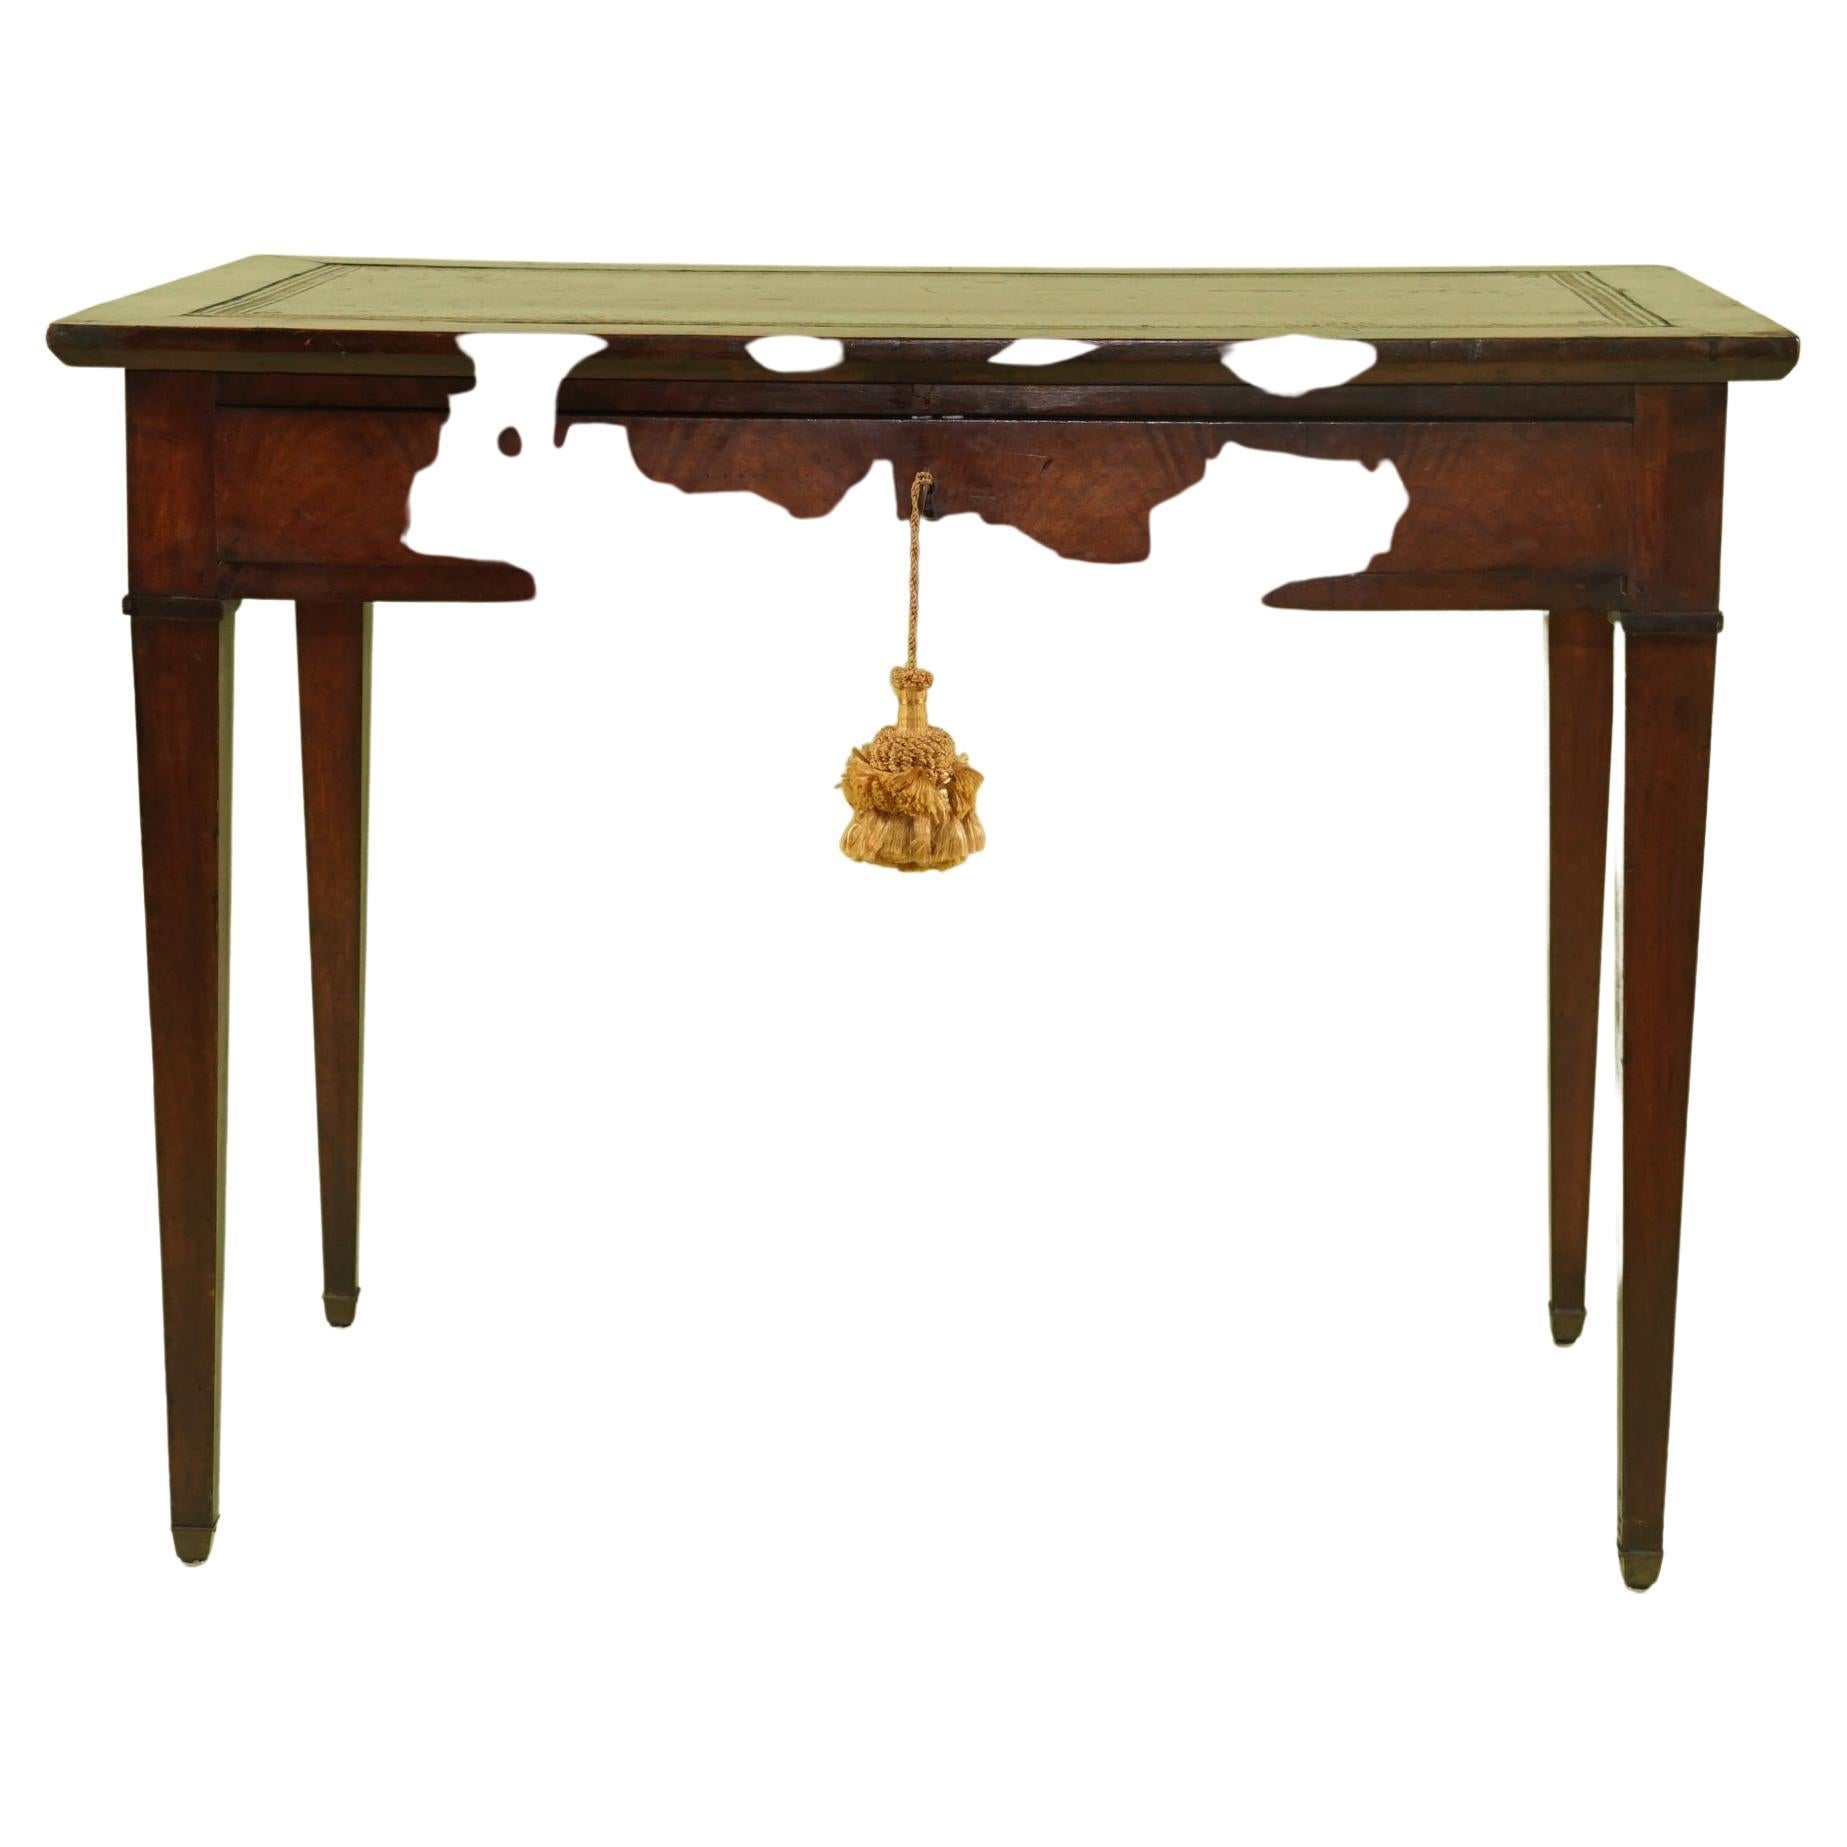 Period French Directior Leather Topped Writing Table.